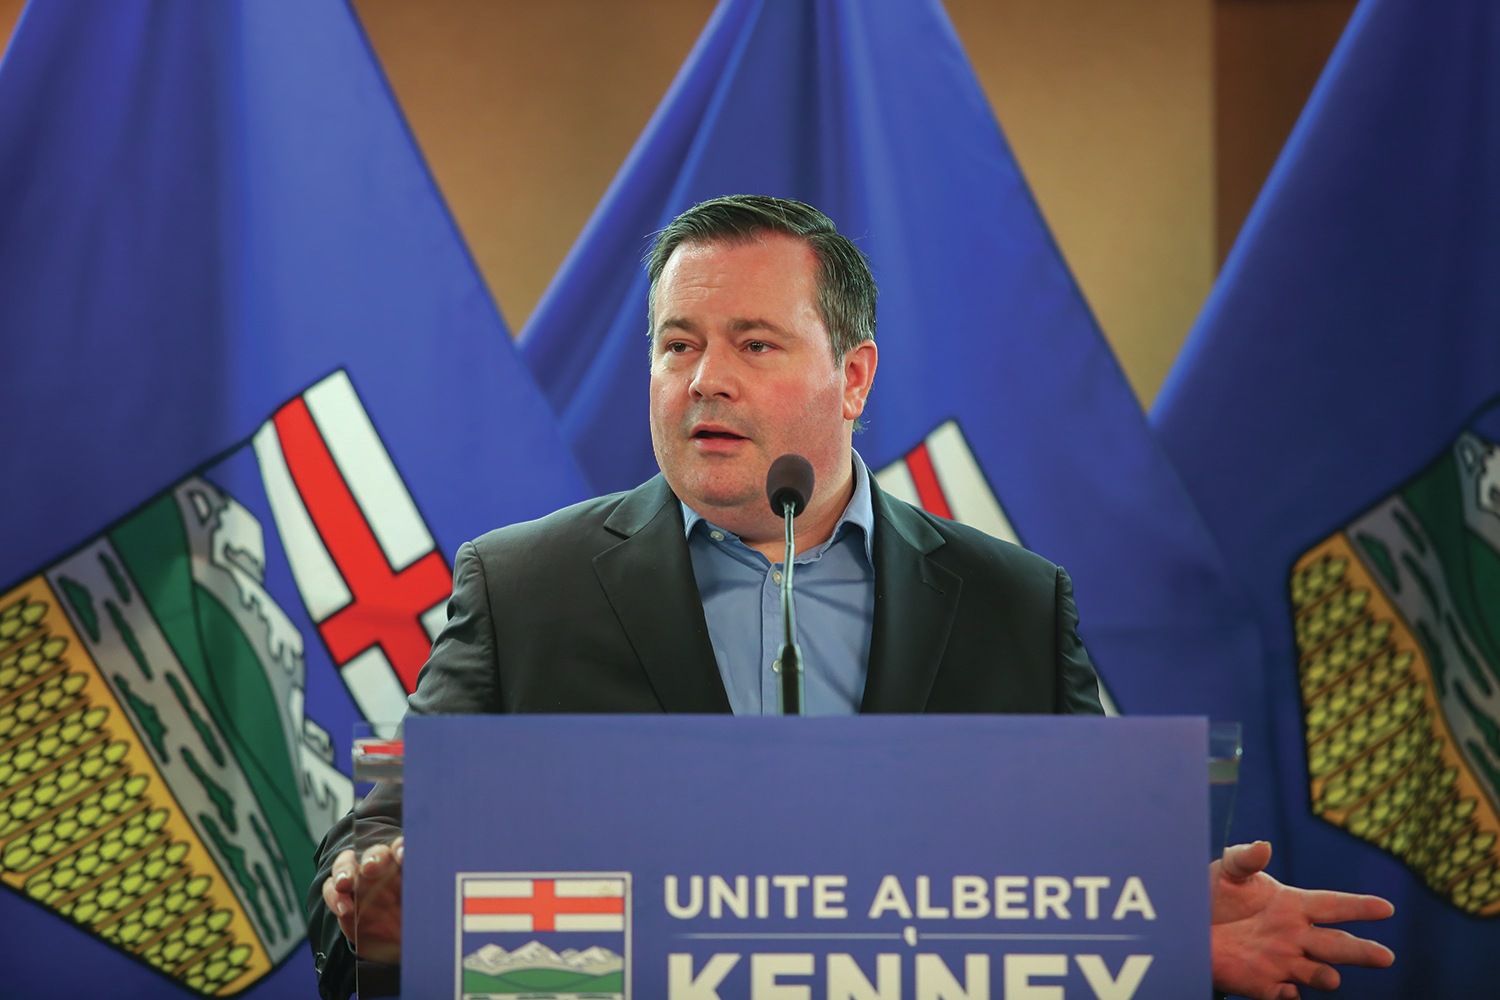 CAMPAIGN TRAIL - PC Party leadership candidate Jason Kenney spoke during a campaign stop in Red Deer last Saturday.